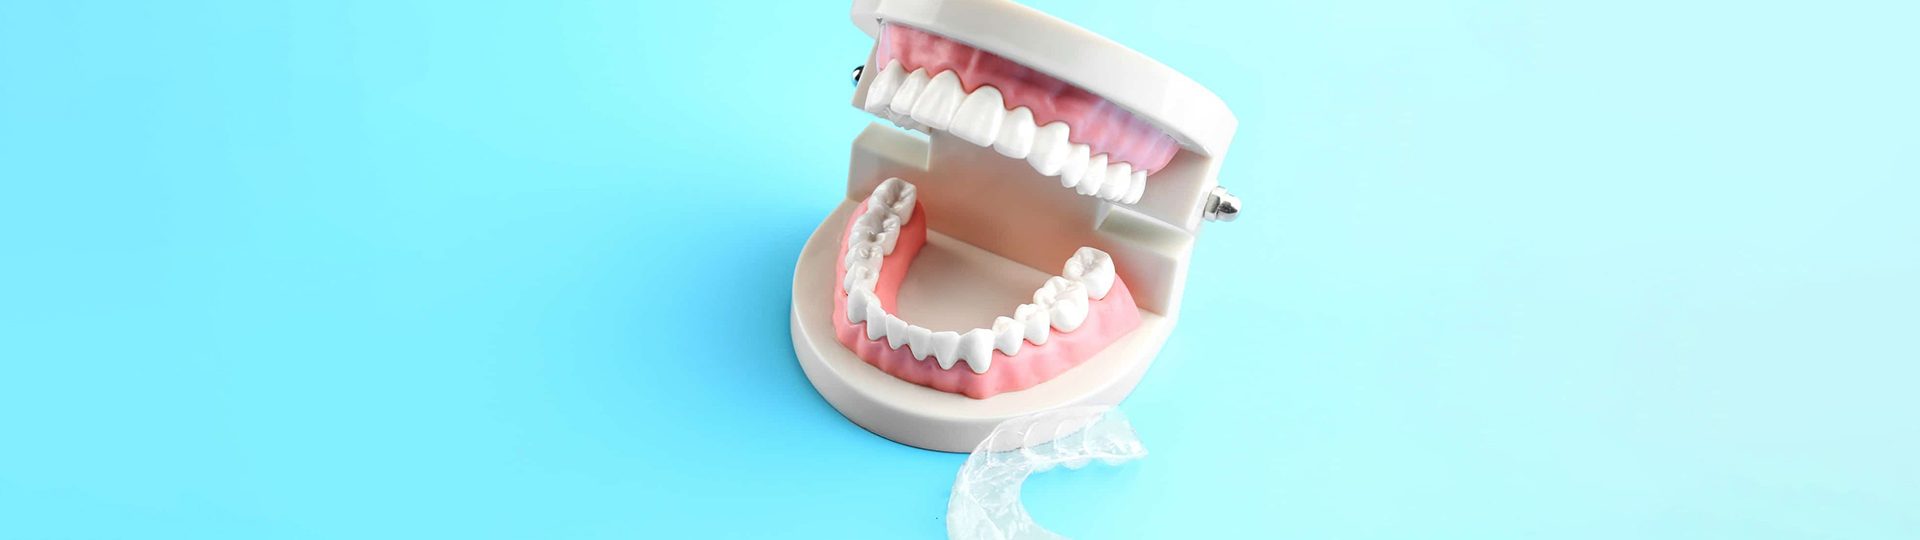 6 Benefits of Replacing a Missing Tooth With a Tooth Bridge